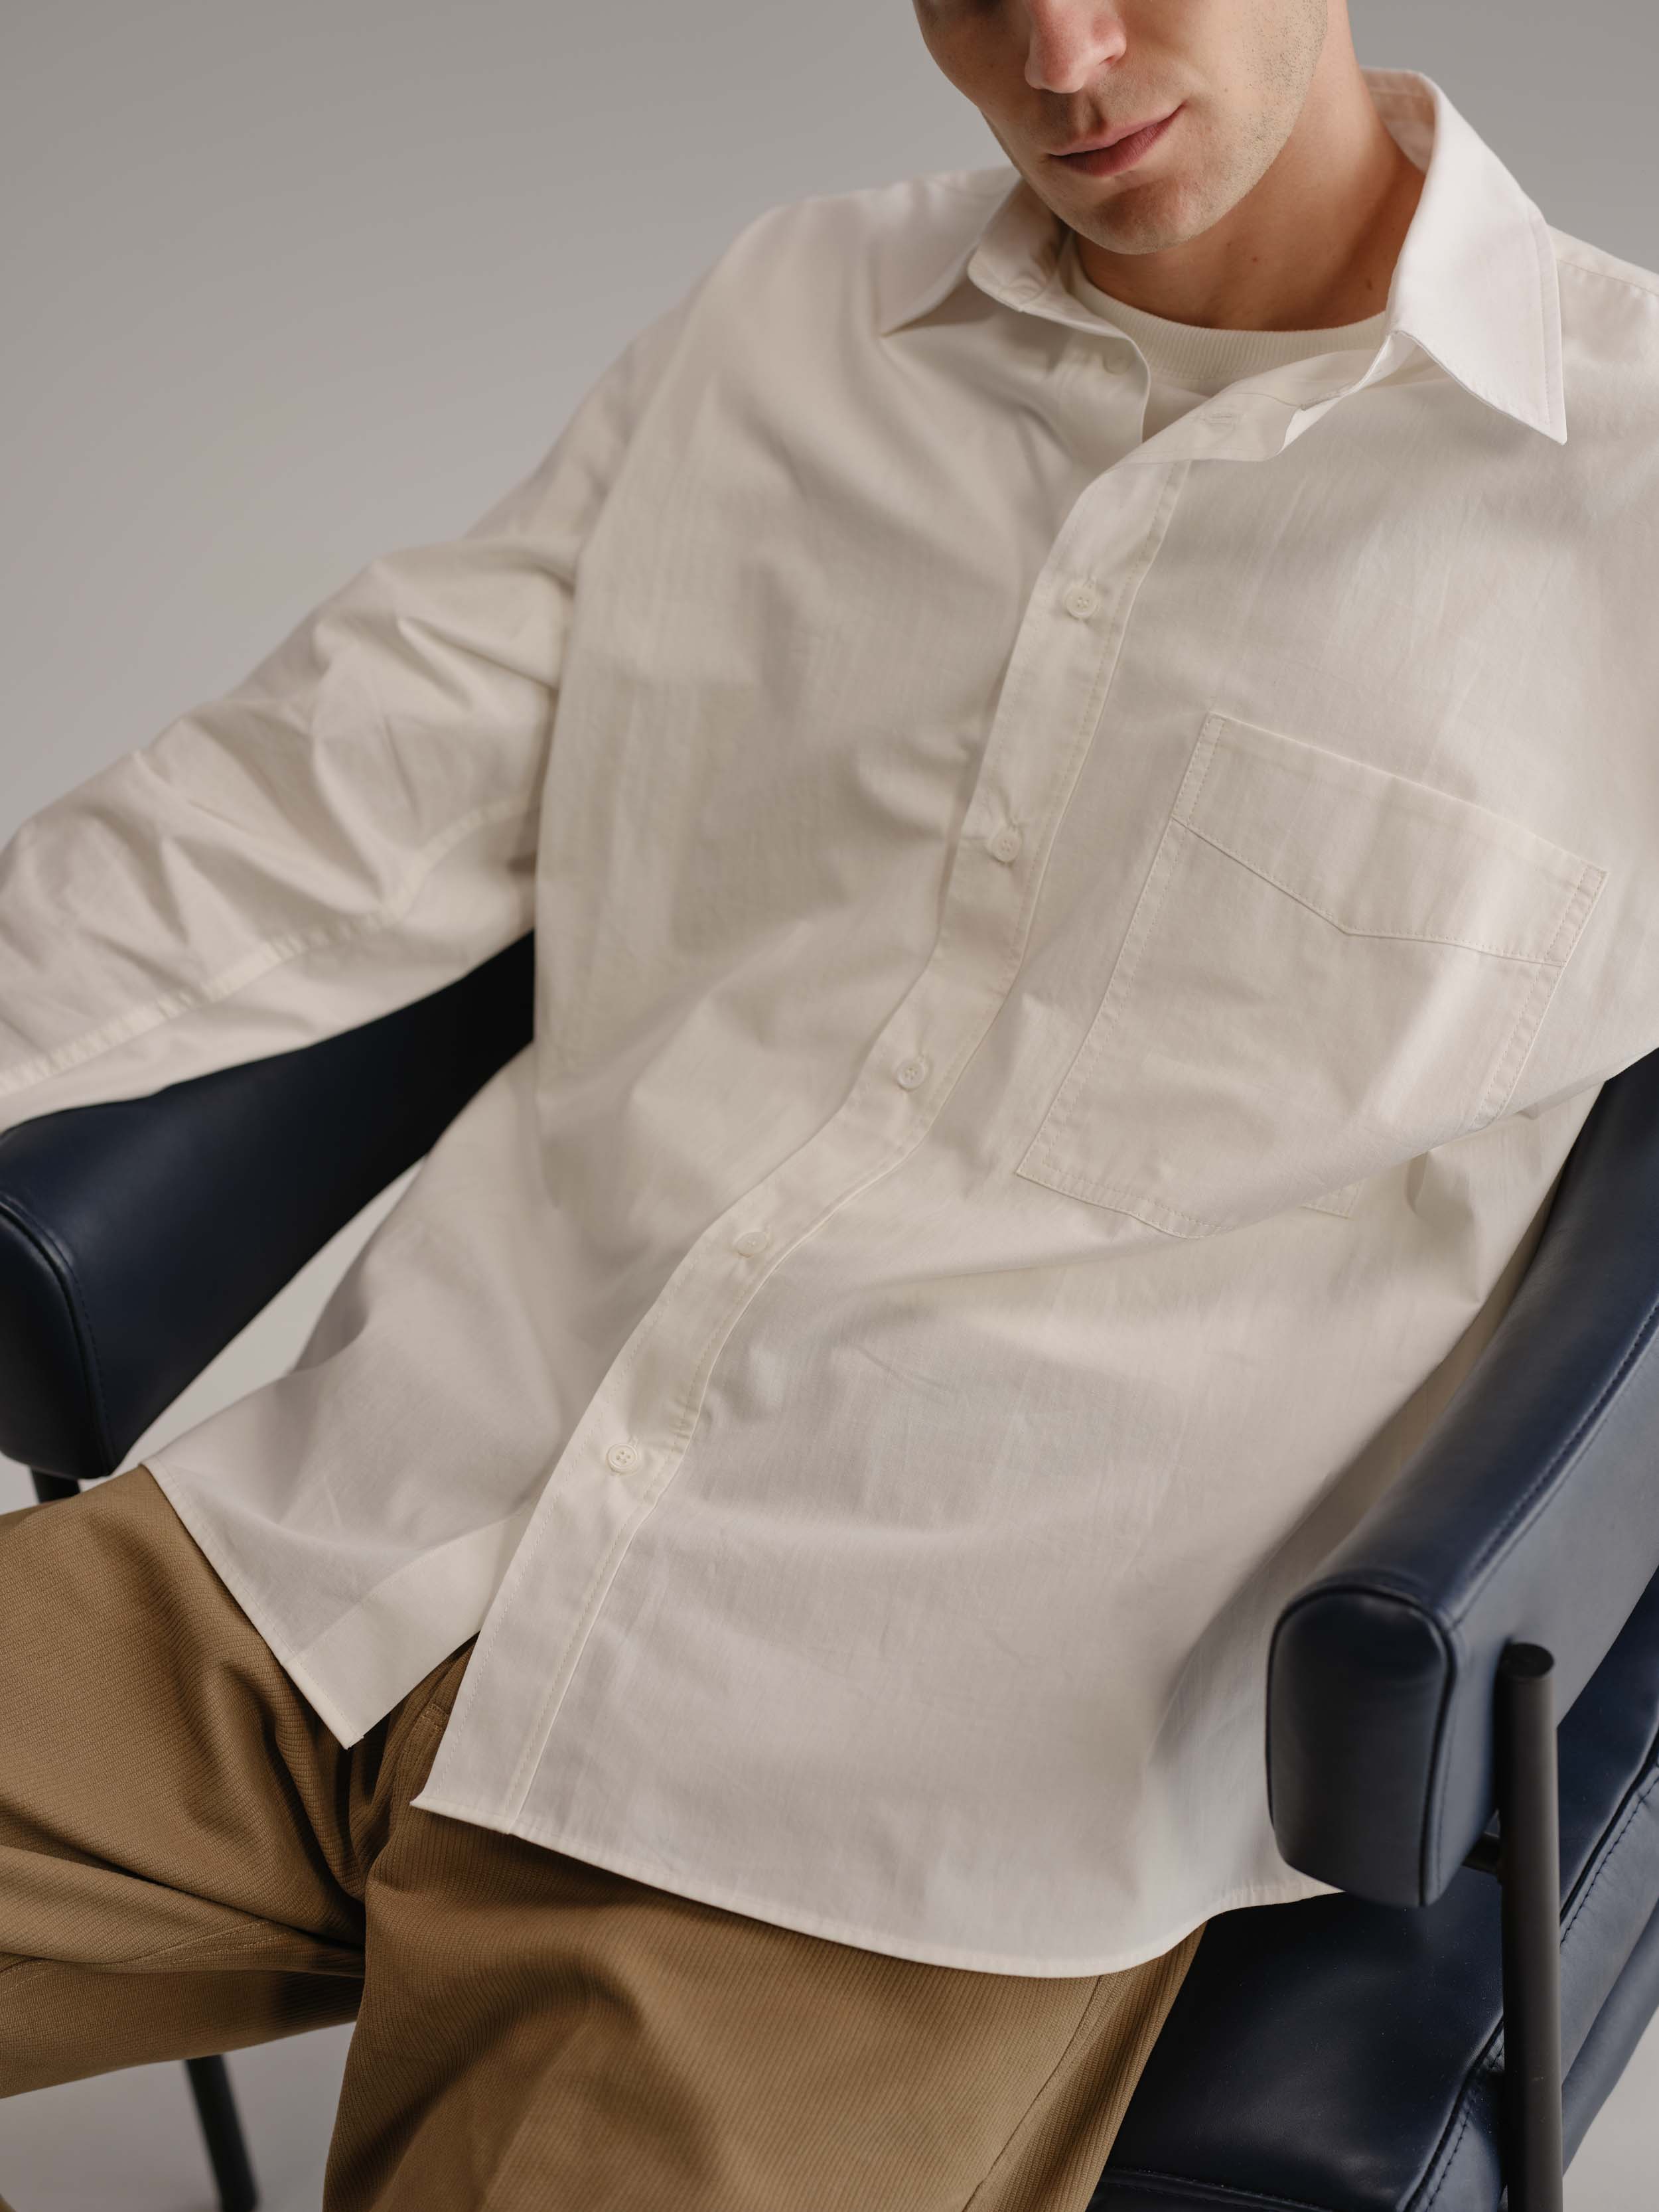 Close up view of white shirt while worn on the body.